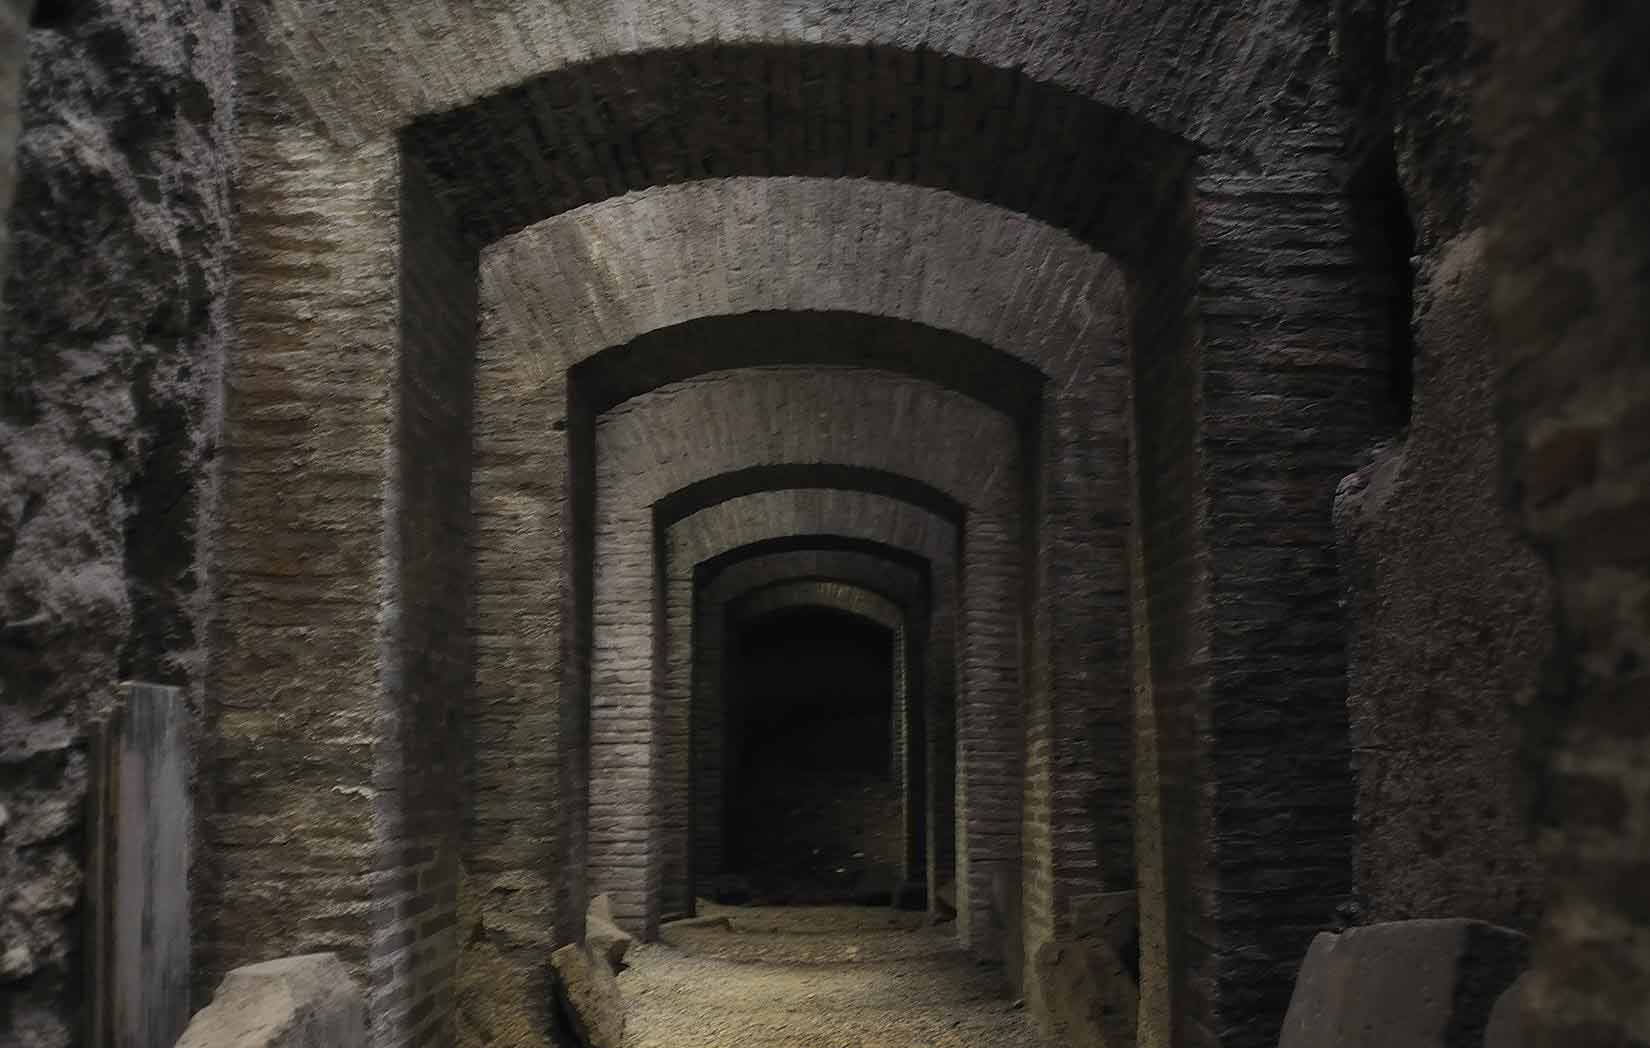 The Crypts and Catacombs of Rome - 700 km of mysteries and secrets